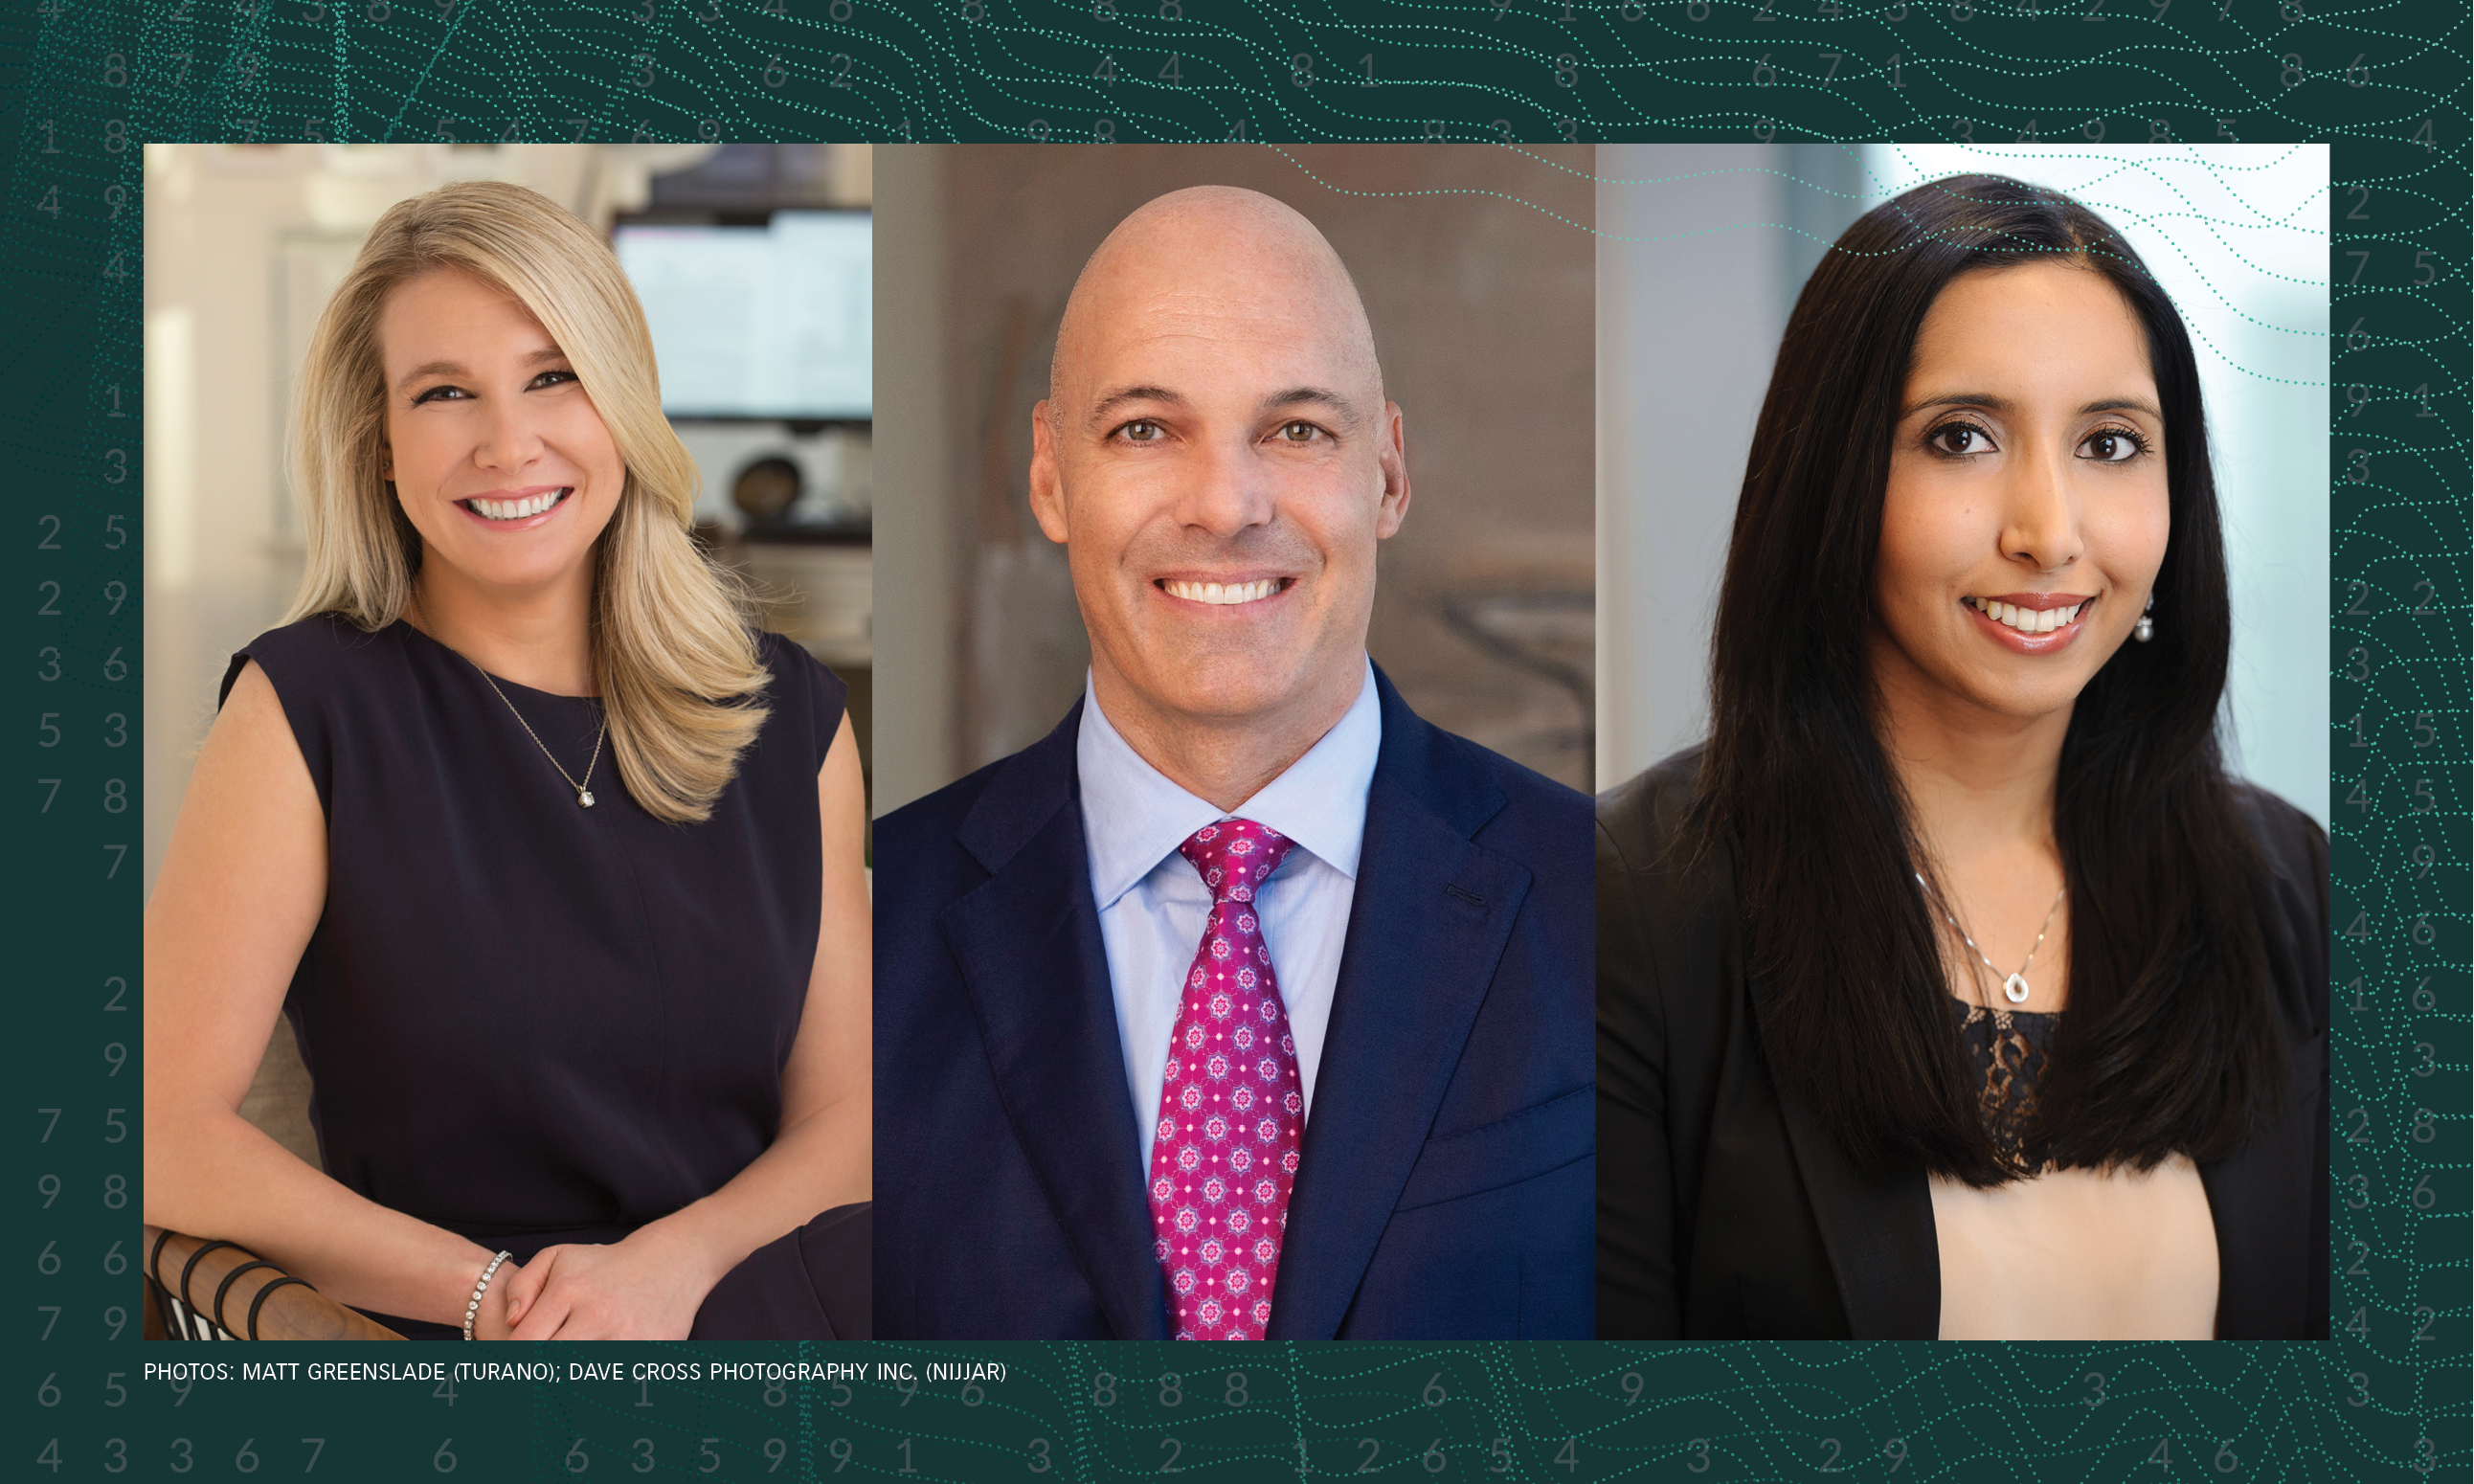 The American Lawyer's 2021 Dealmakers of the Year